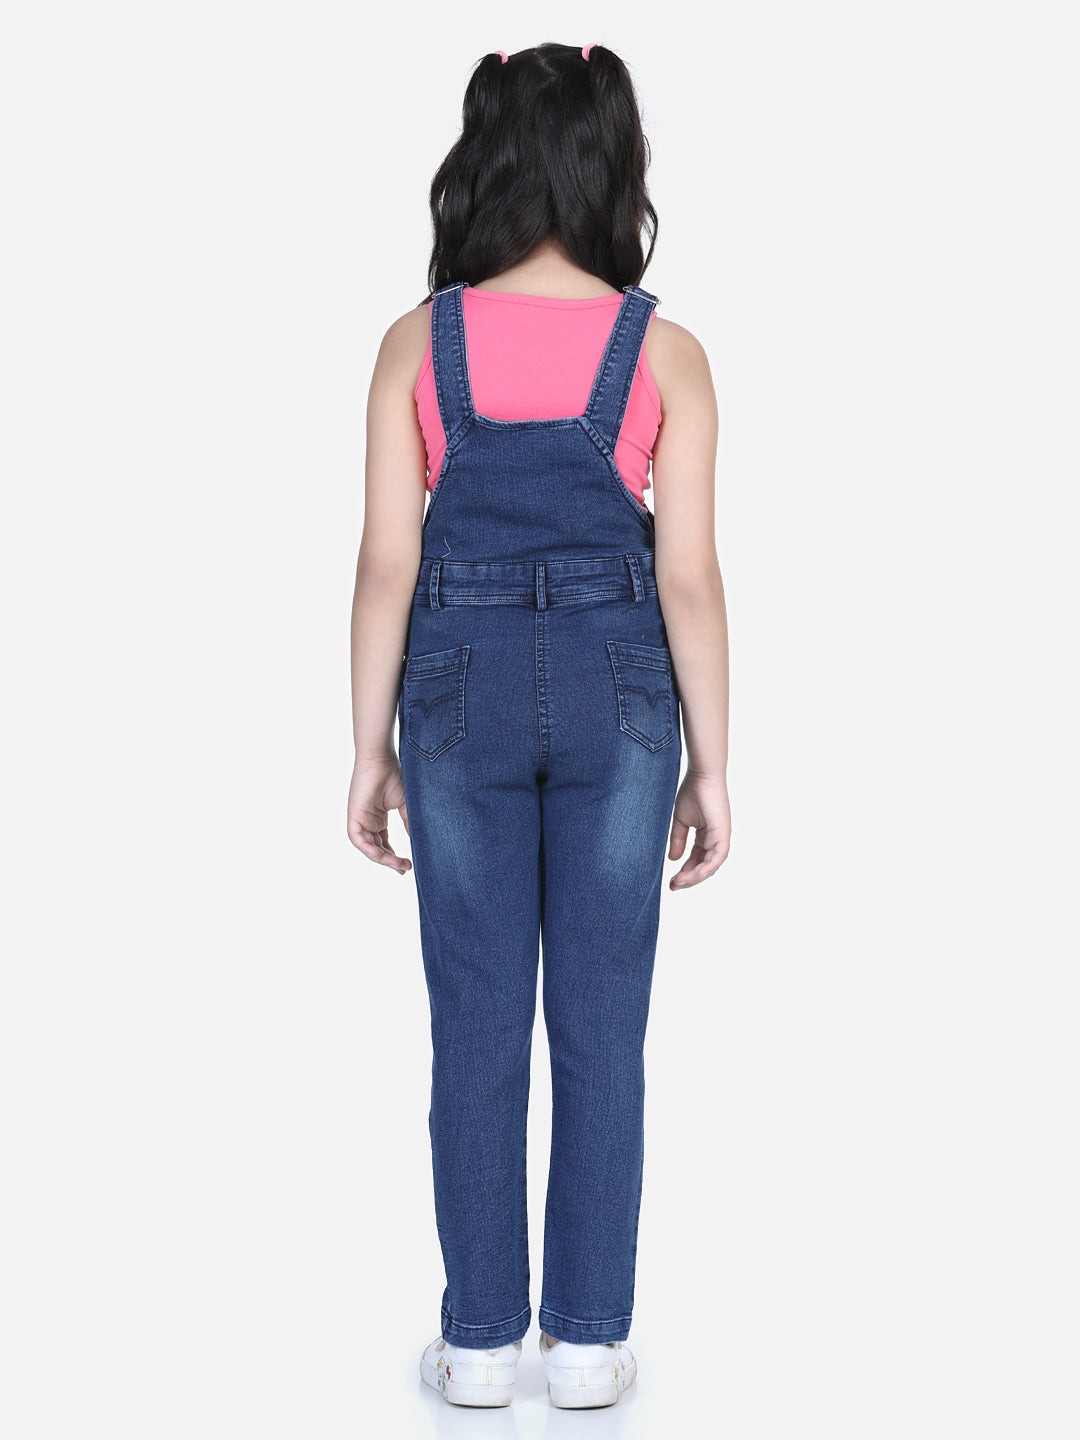 Girls Denim Dungaree with PatchWork Denim (T-Shirt not included)